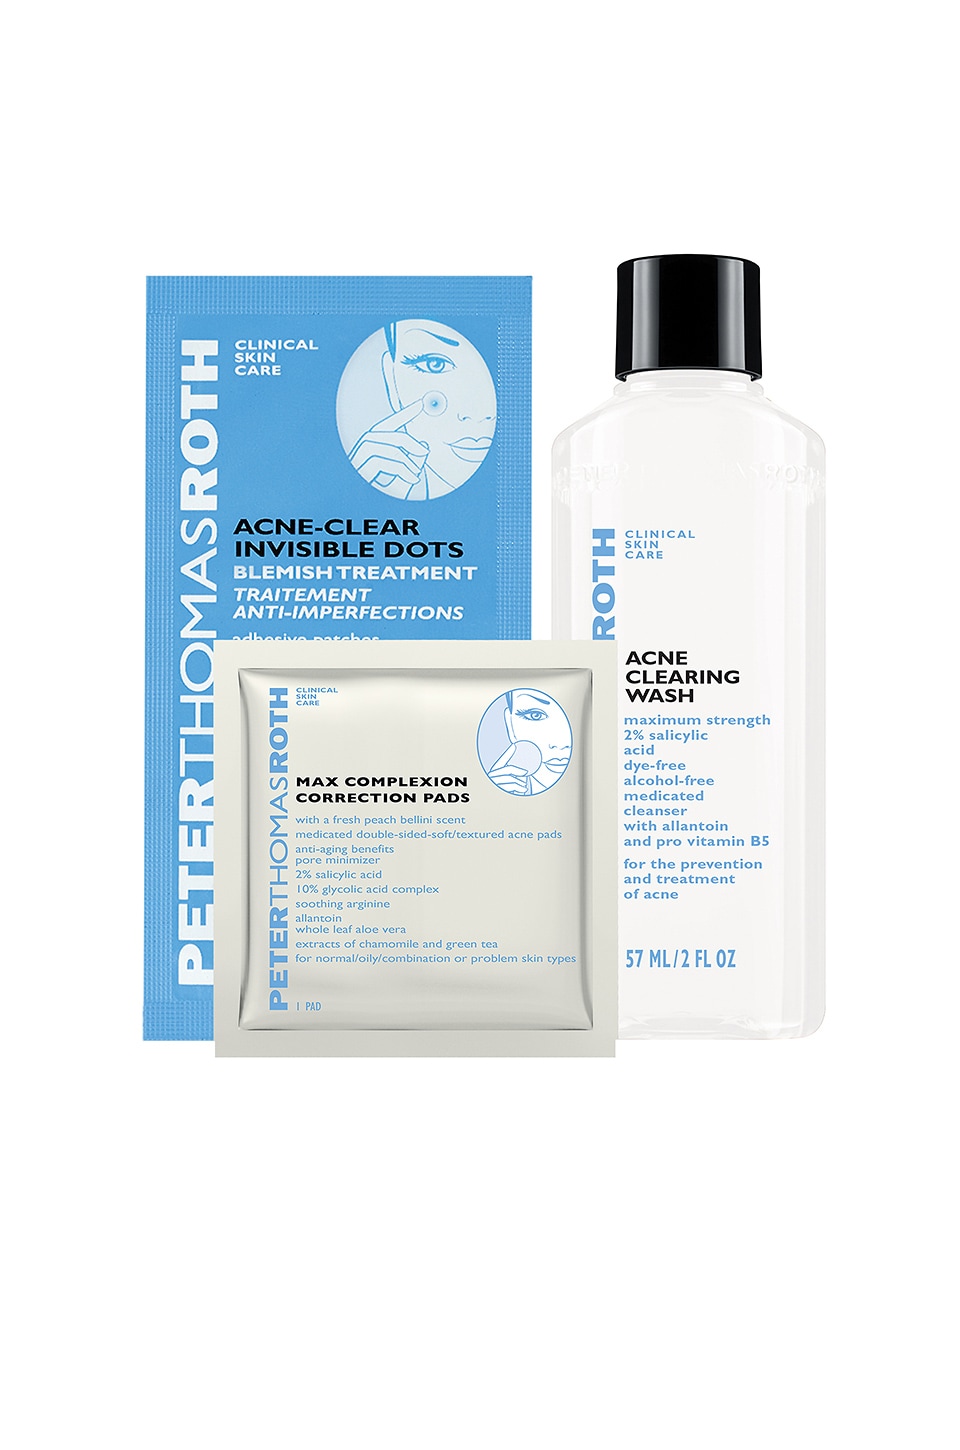 PETER THOMAS ROTH ACNE DISCOVERY KIT